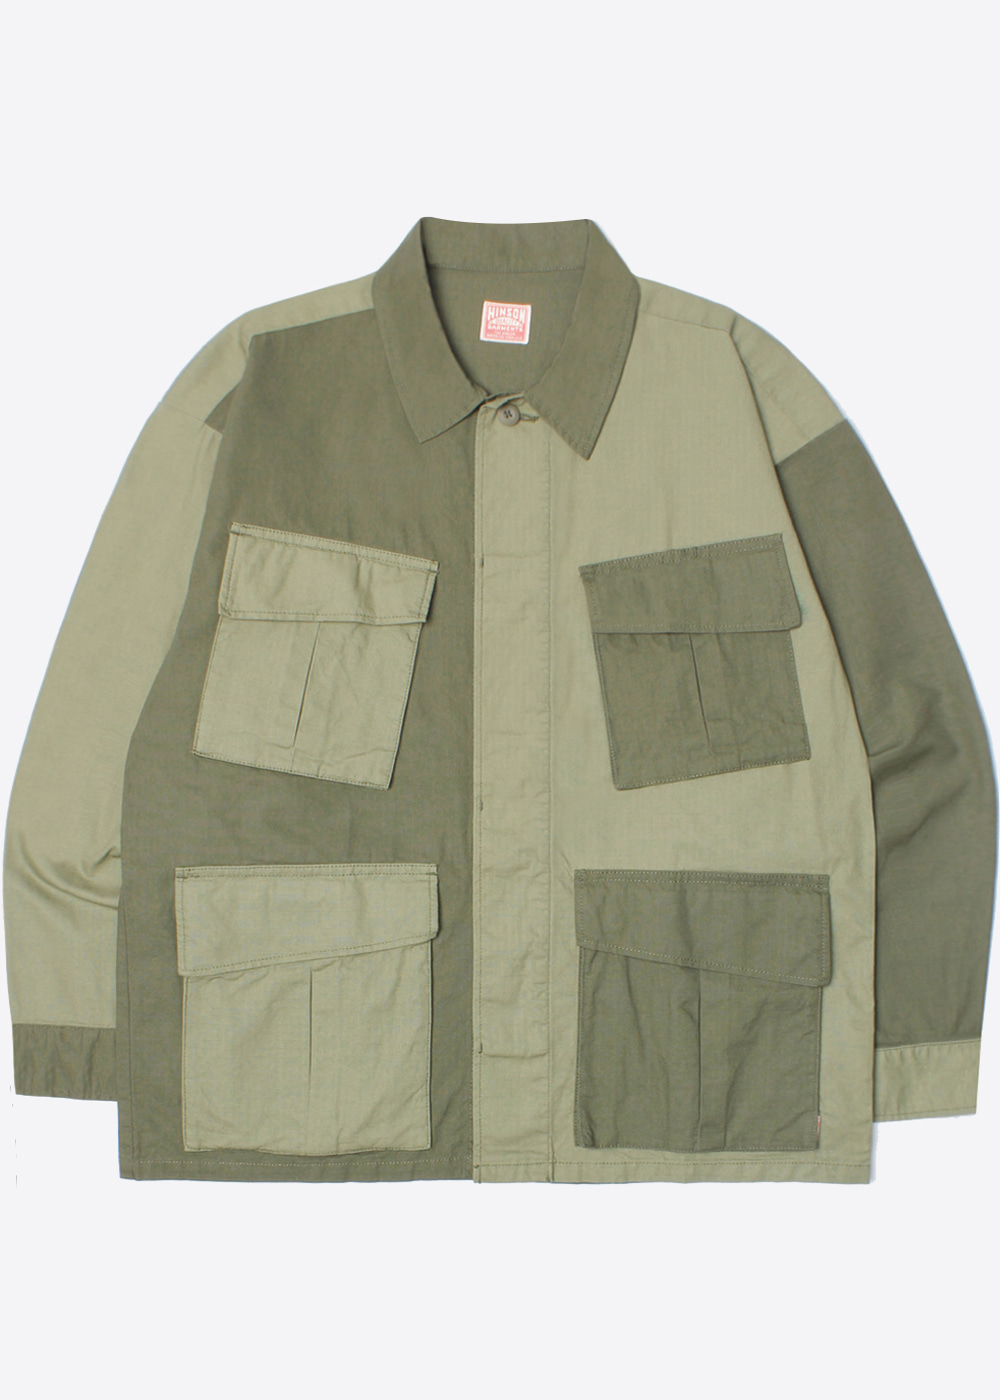 HINSON BY FREAK’S STORE’over fit’patchwork m-51 motive filed parka